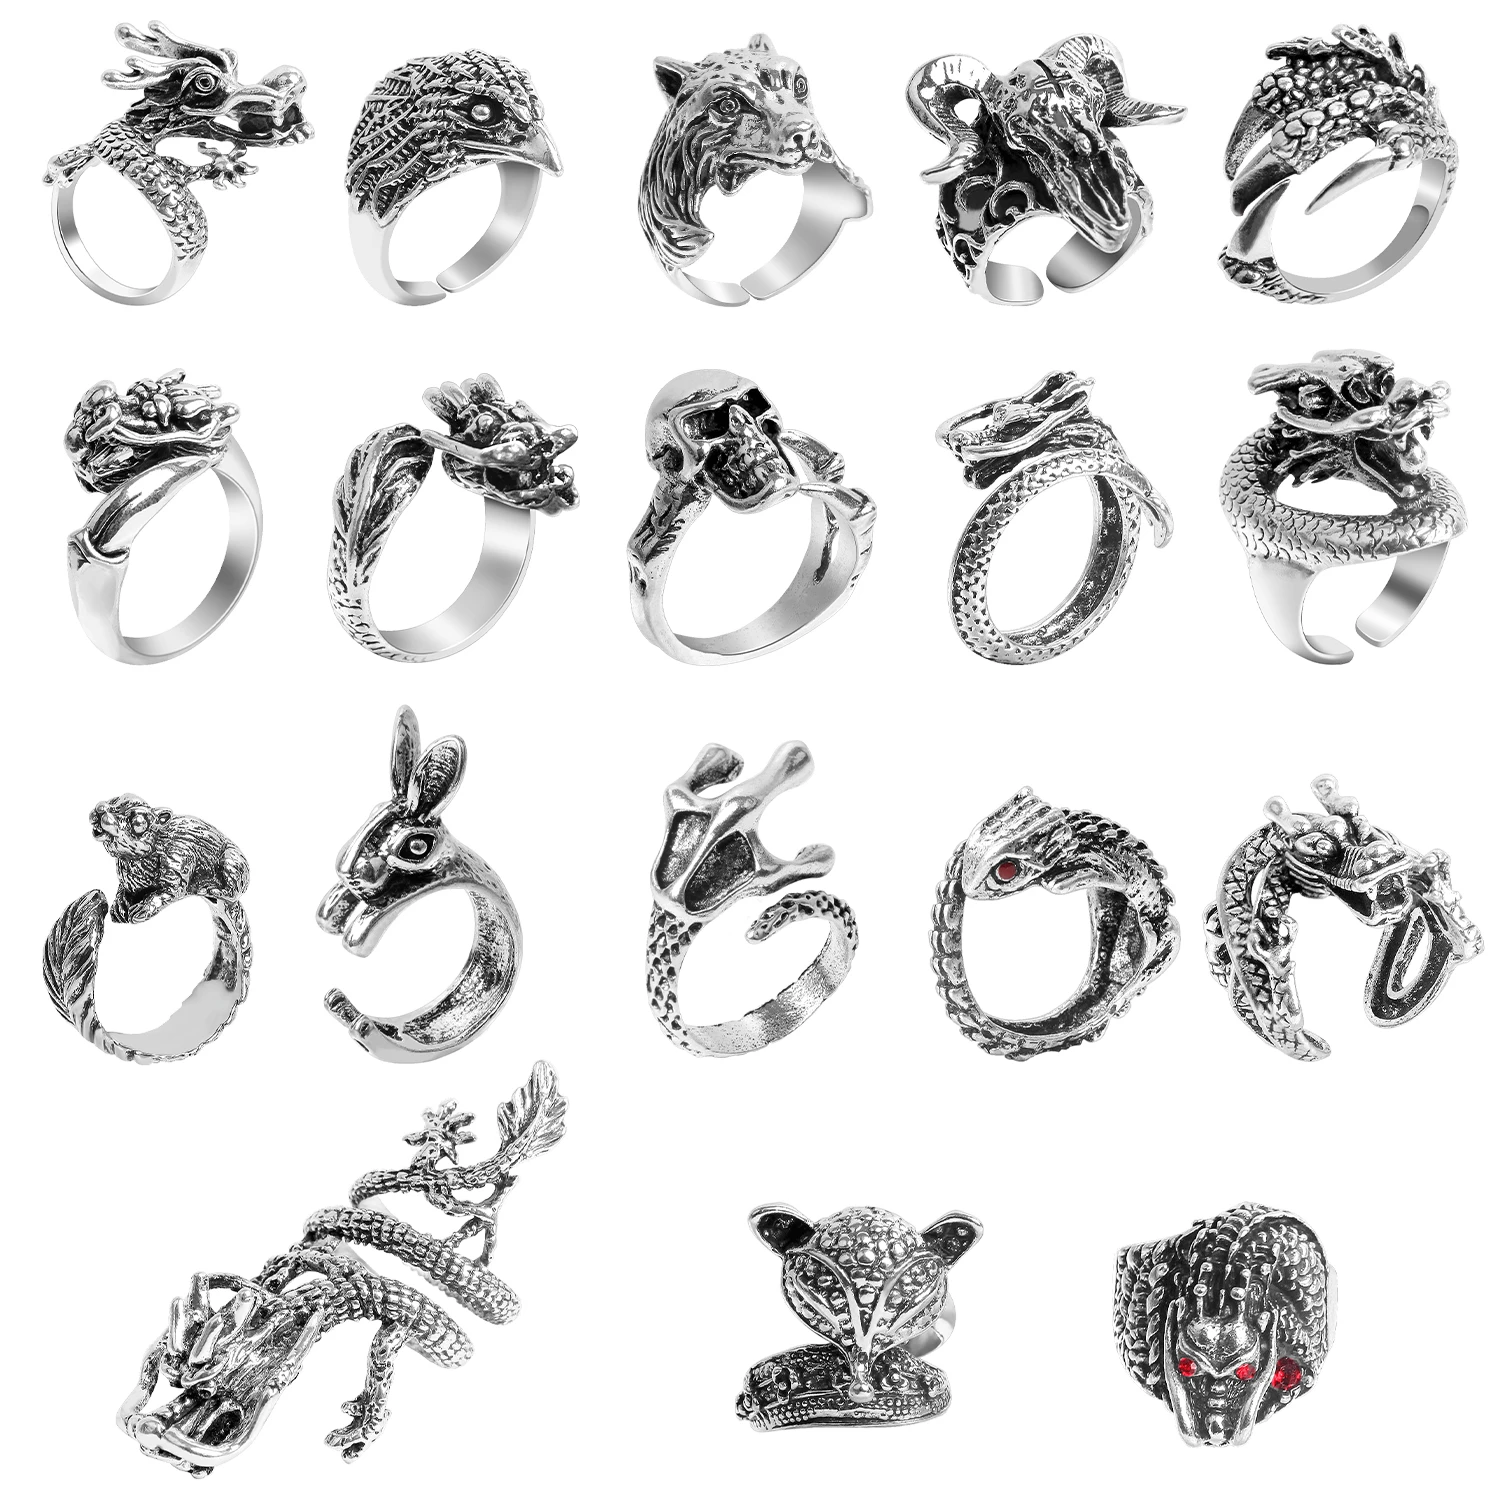 Vintage Punk Domineering Animal Dragon Designs Adjustable Rings For Men Teen Boys Retro Cool Fashion Party Jewelry Gift For Men